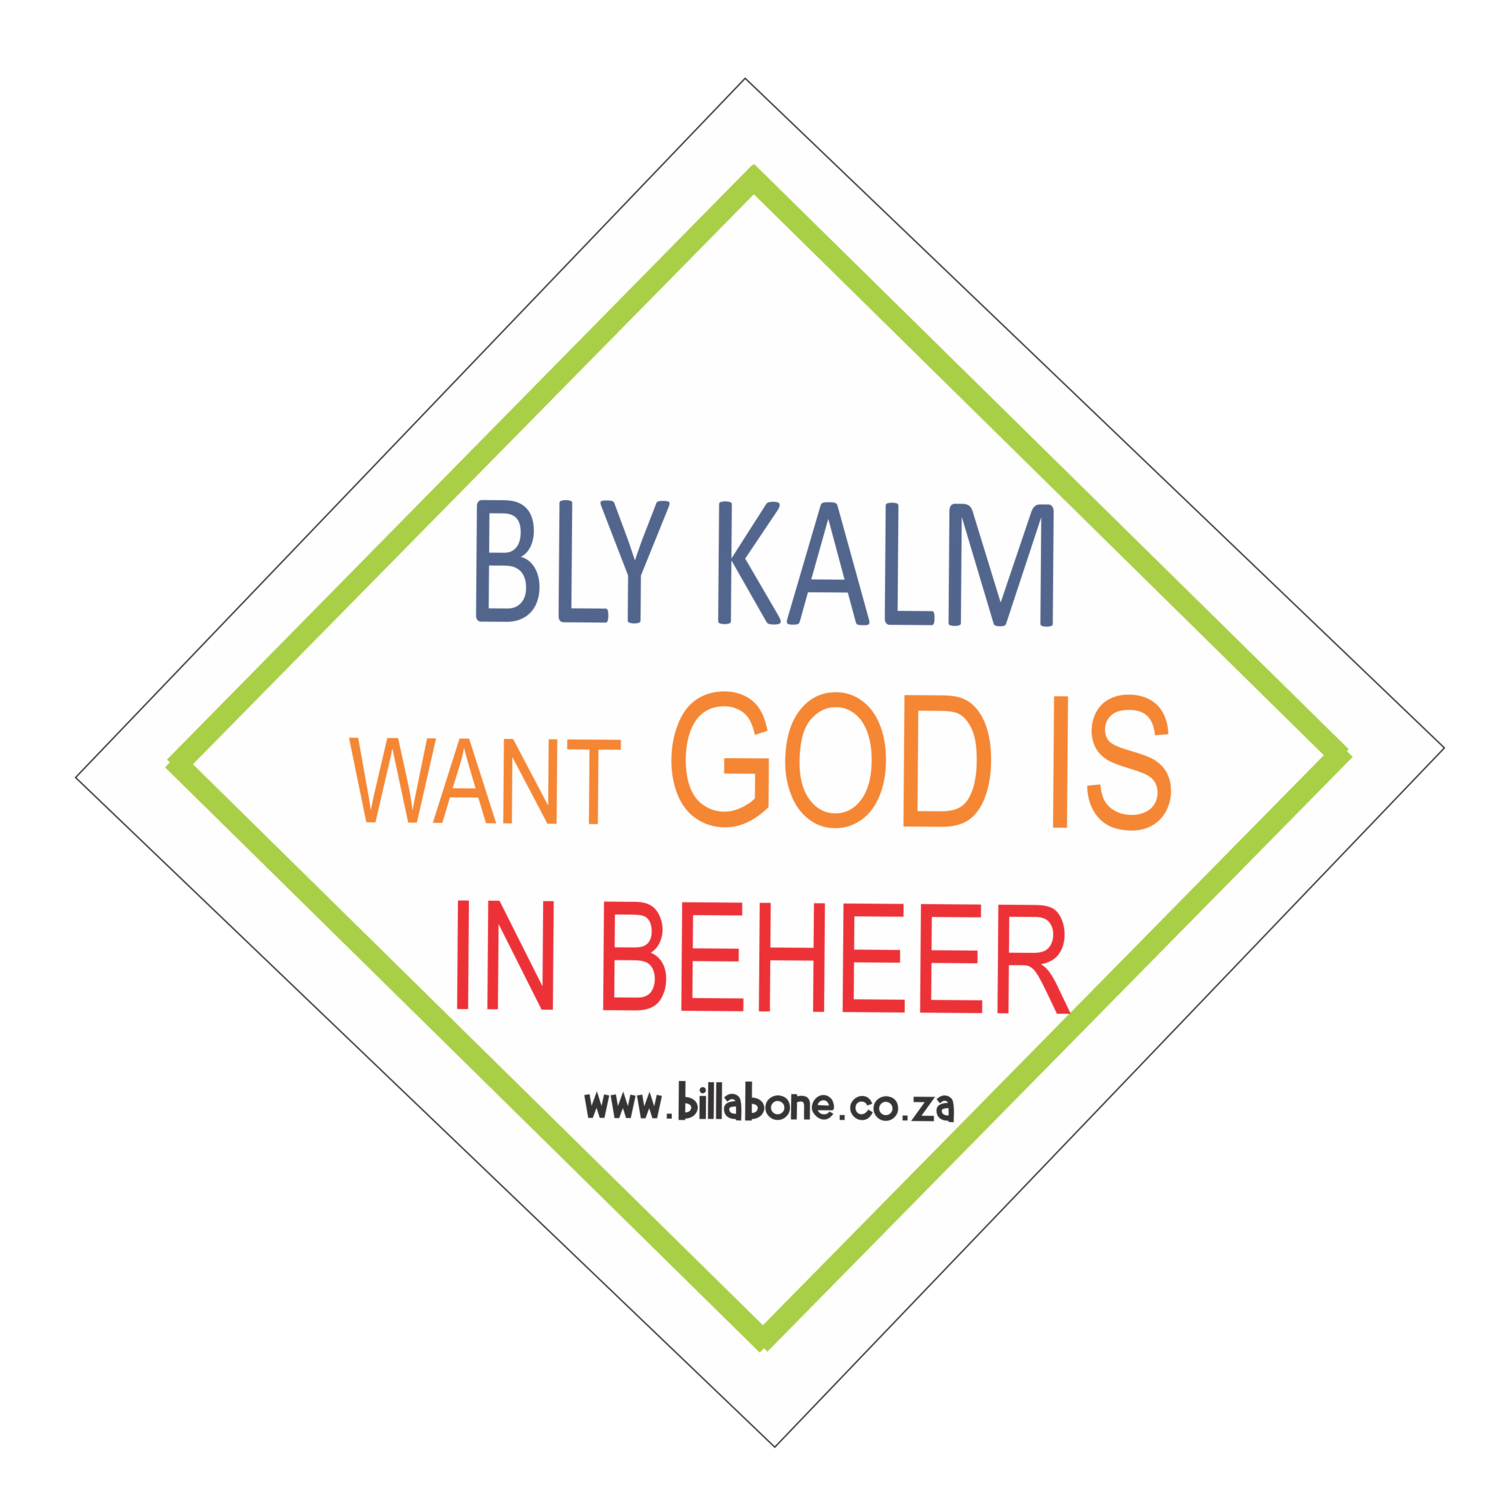 Bly Kalm want God is in beheer - Car Sign or Sticker